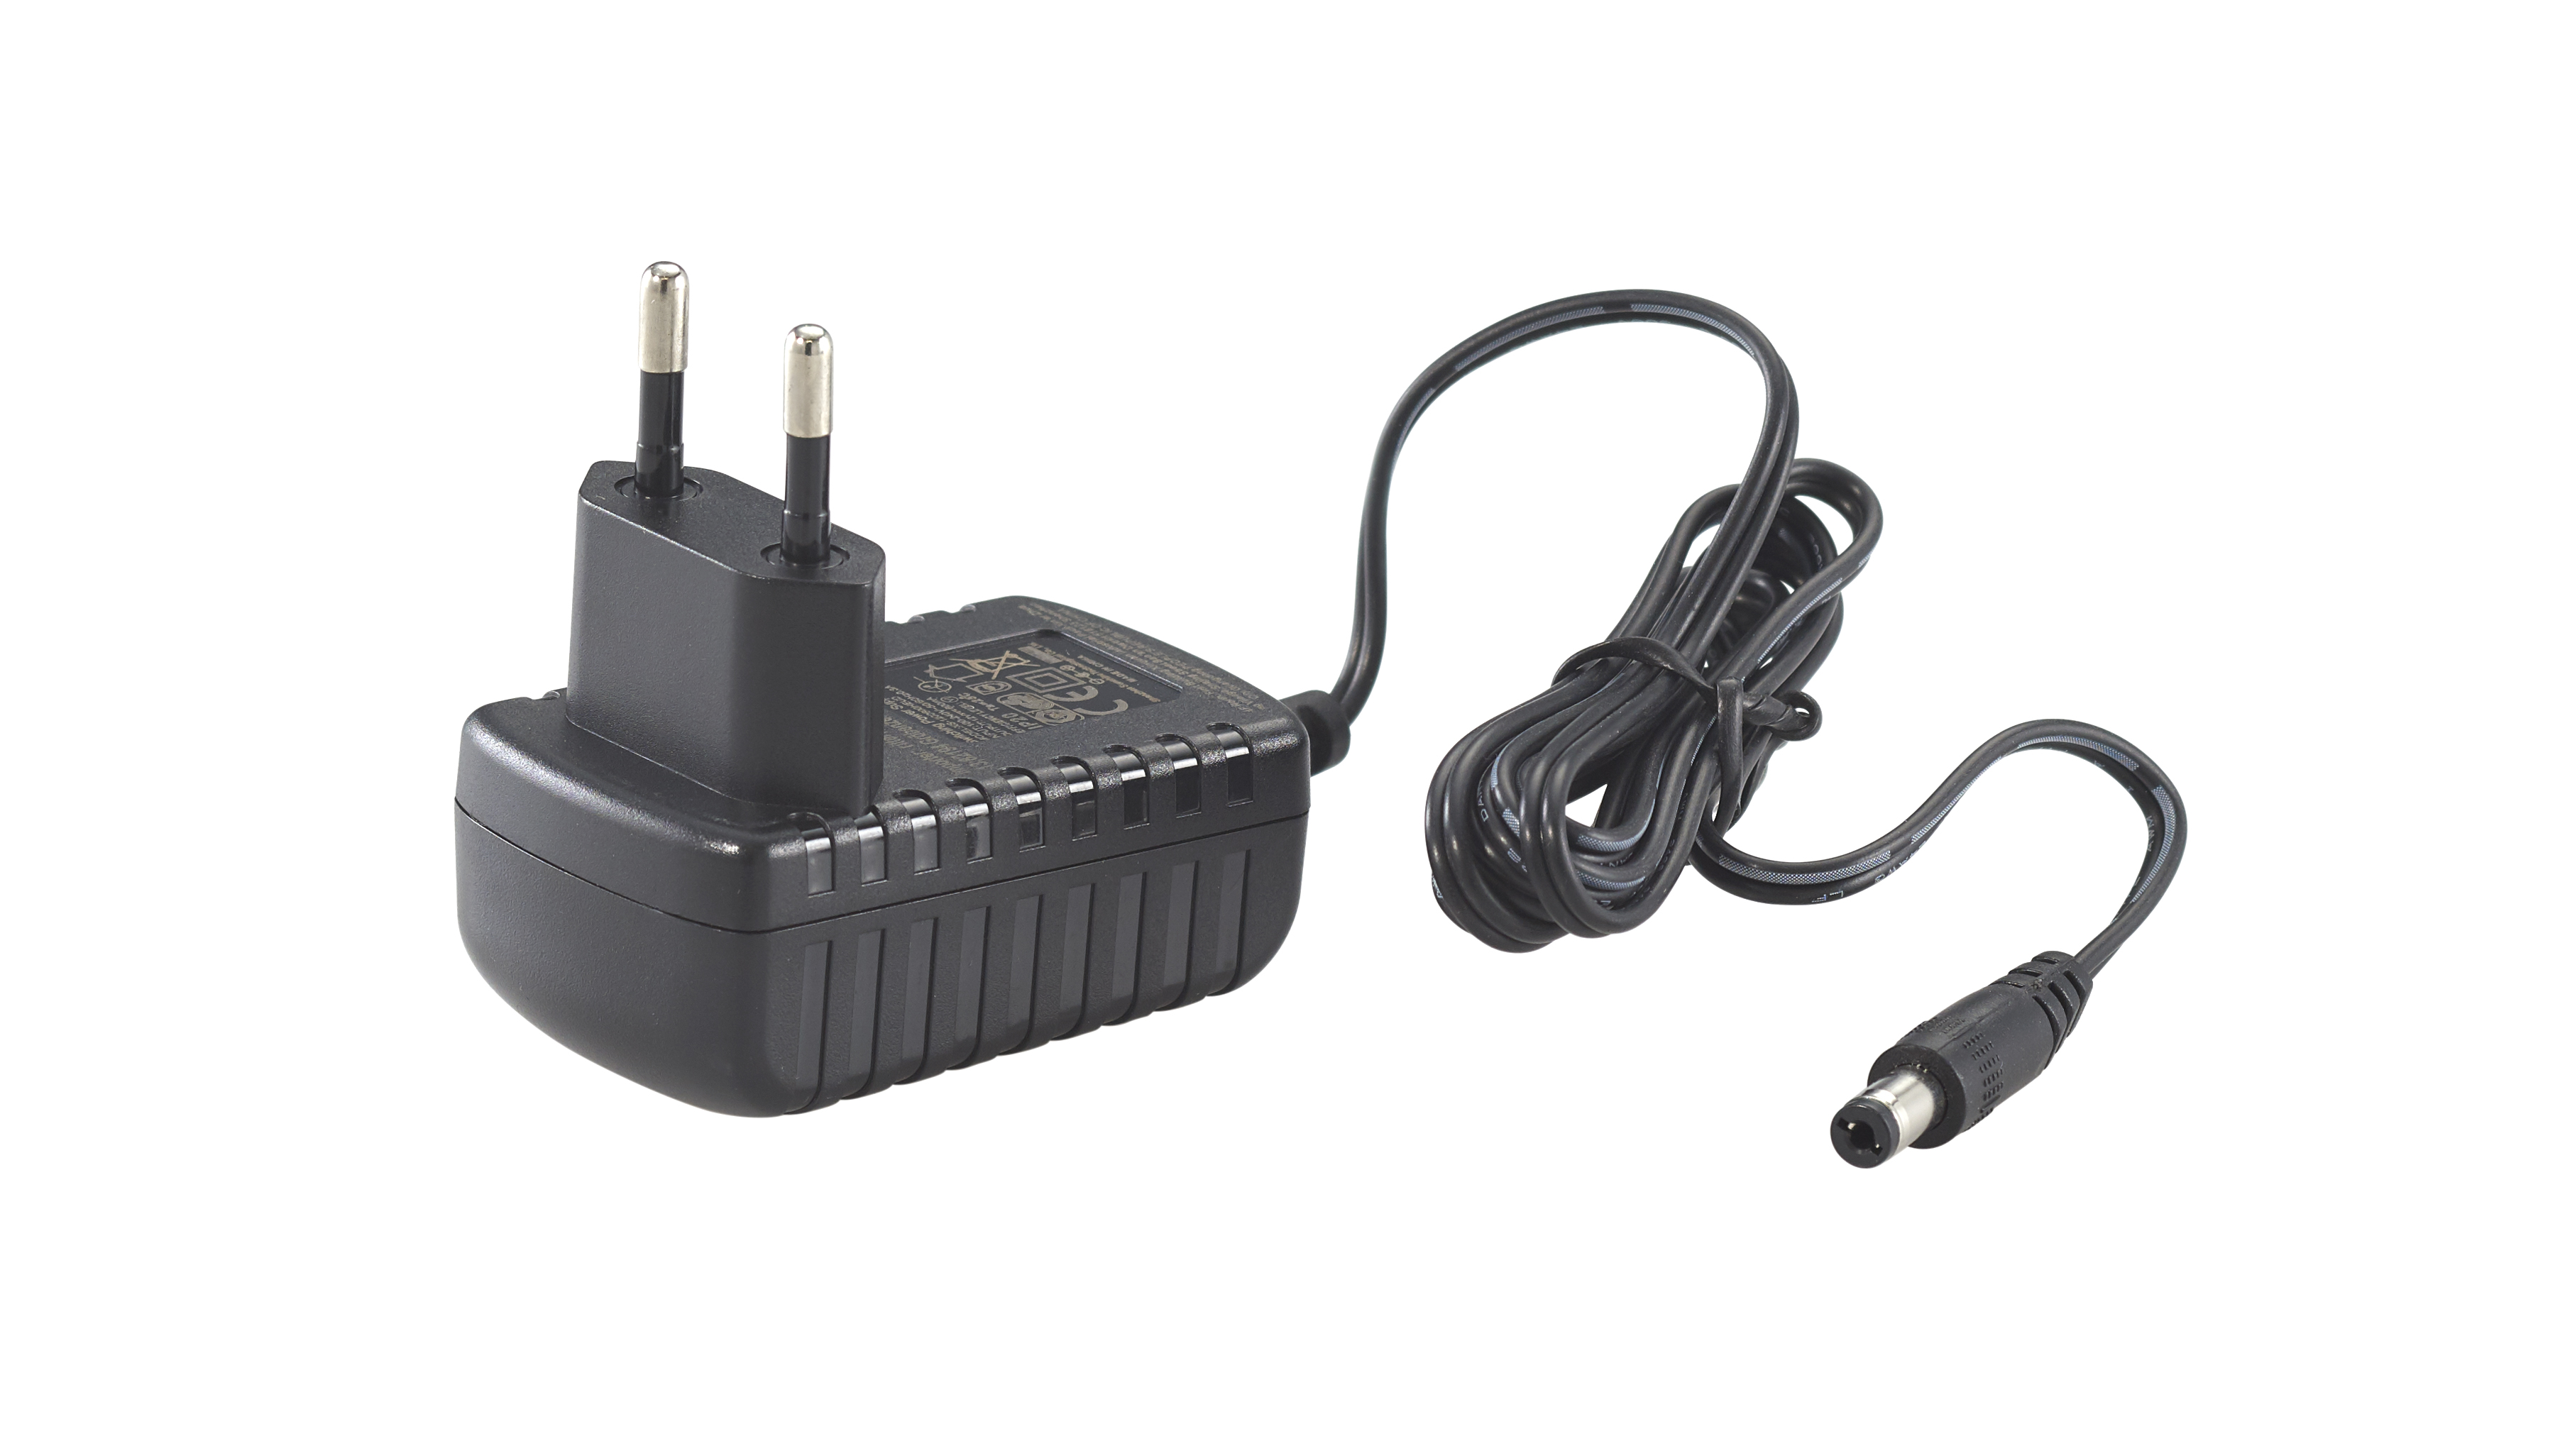 Plug-in power supply